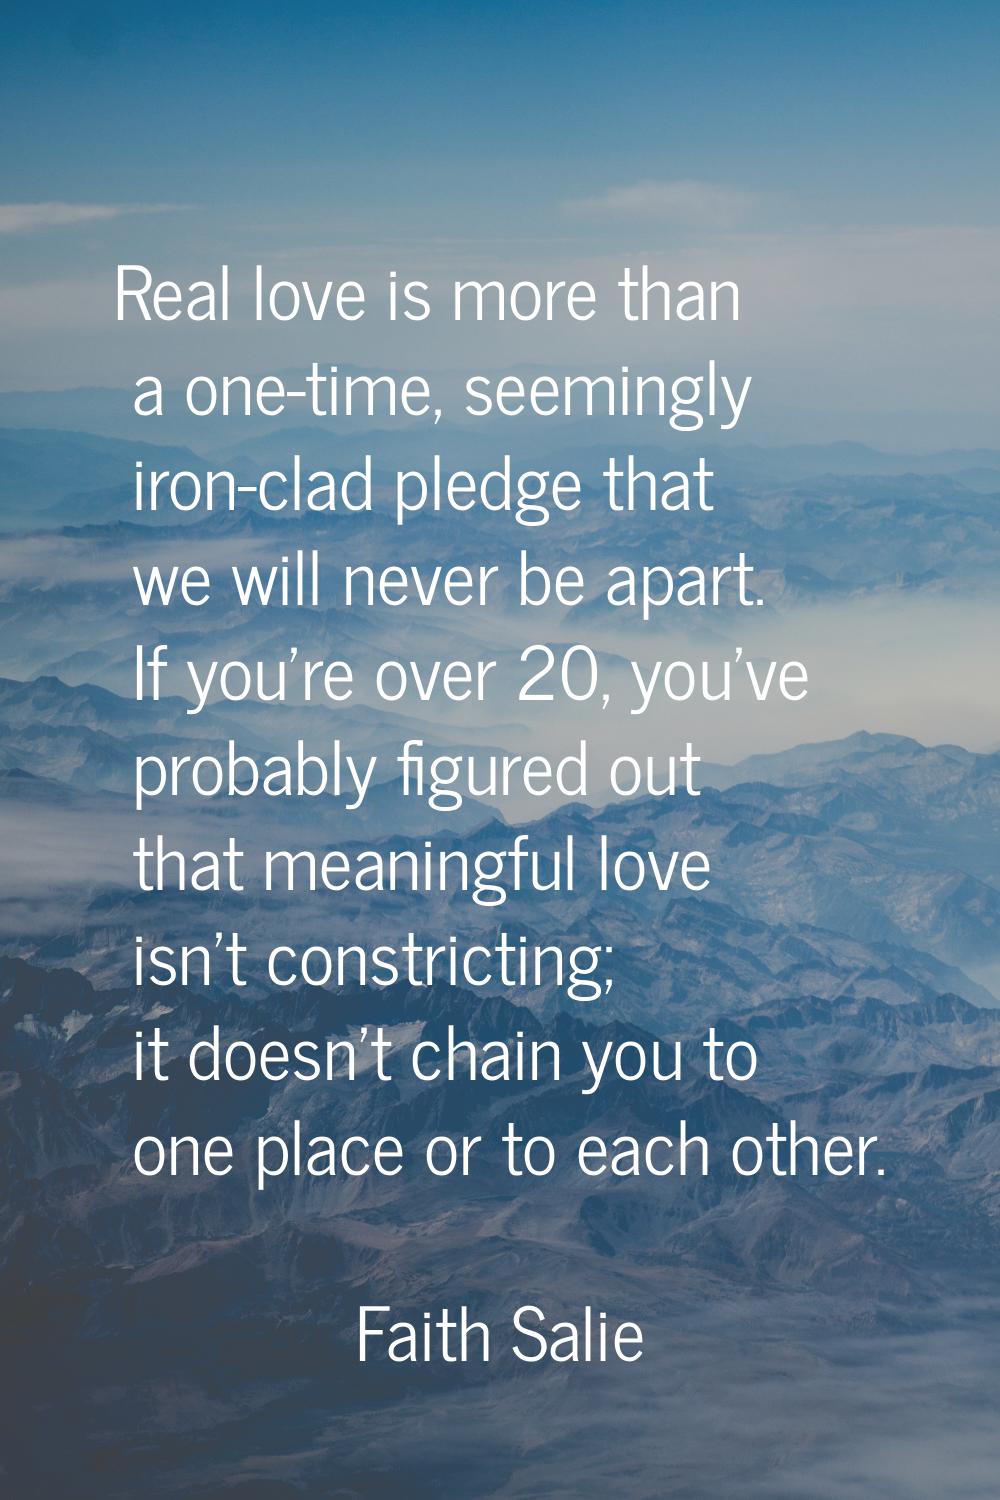 Real love is more than a one-time, seemingly iron-clad pledge that we will never be apart. If you'r